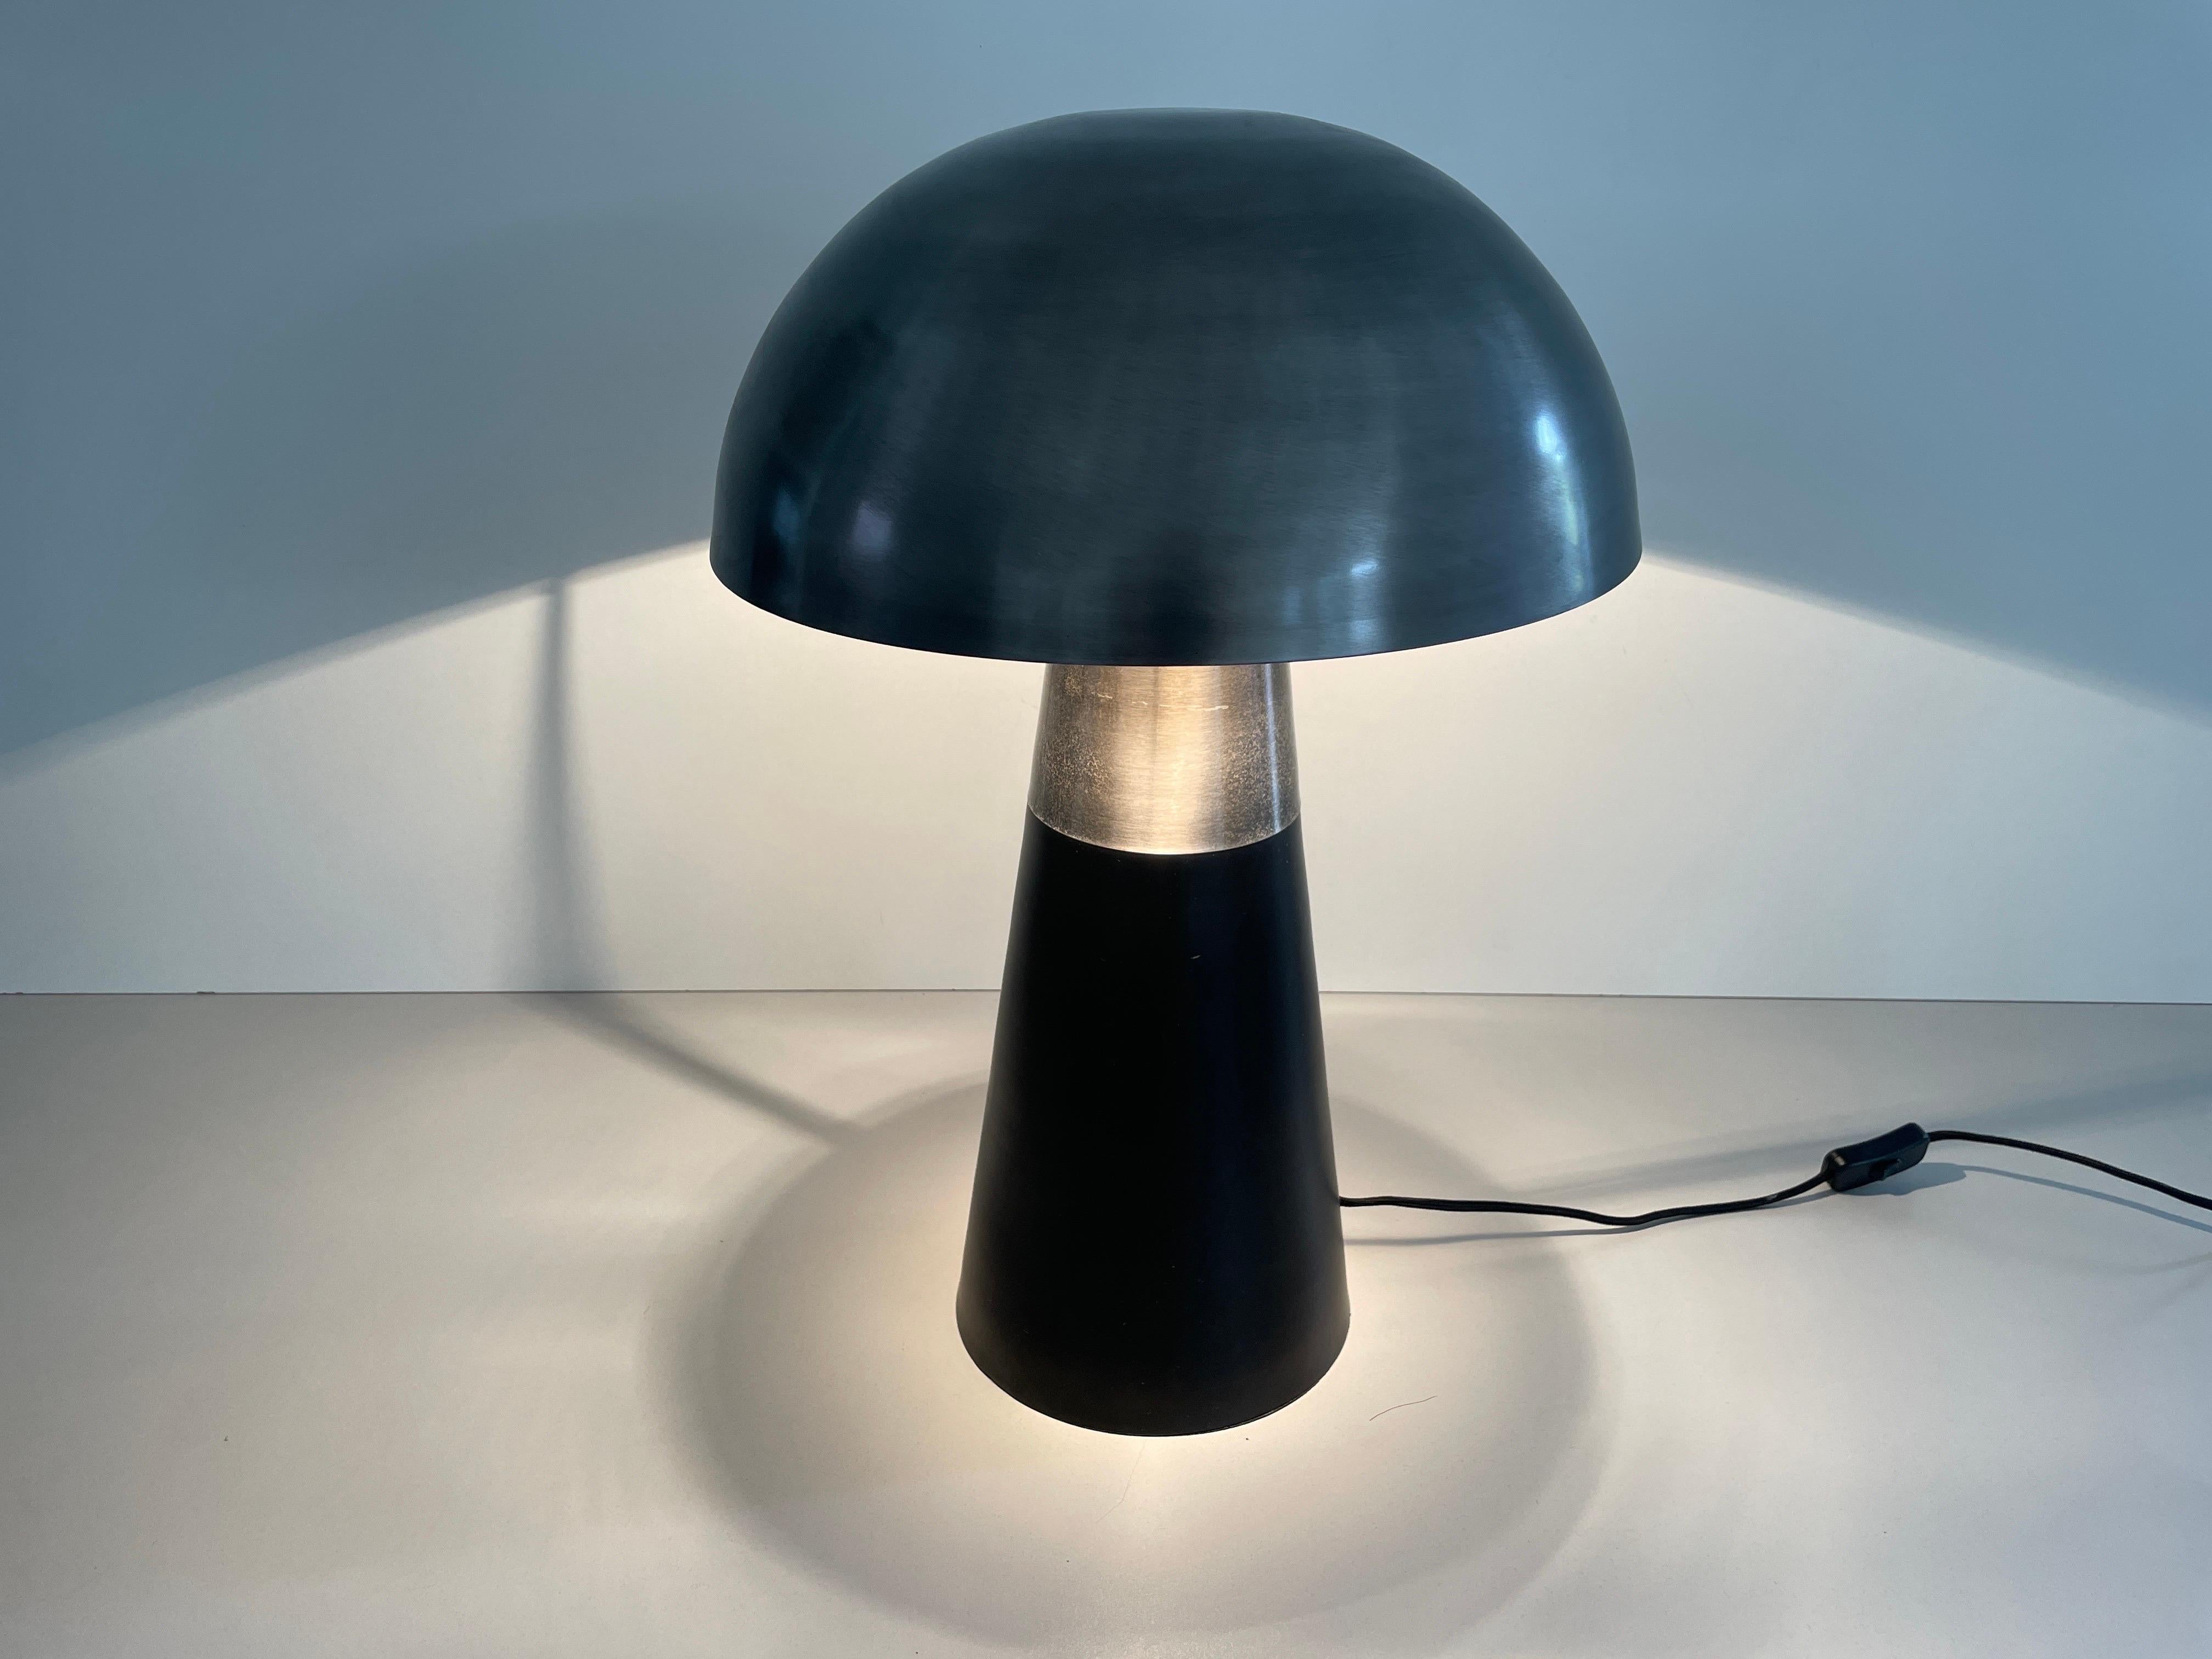 Muschroom and Conic Design Large Table Lamp by LAMBERT, 1980s, Germany For Sale 6